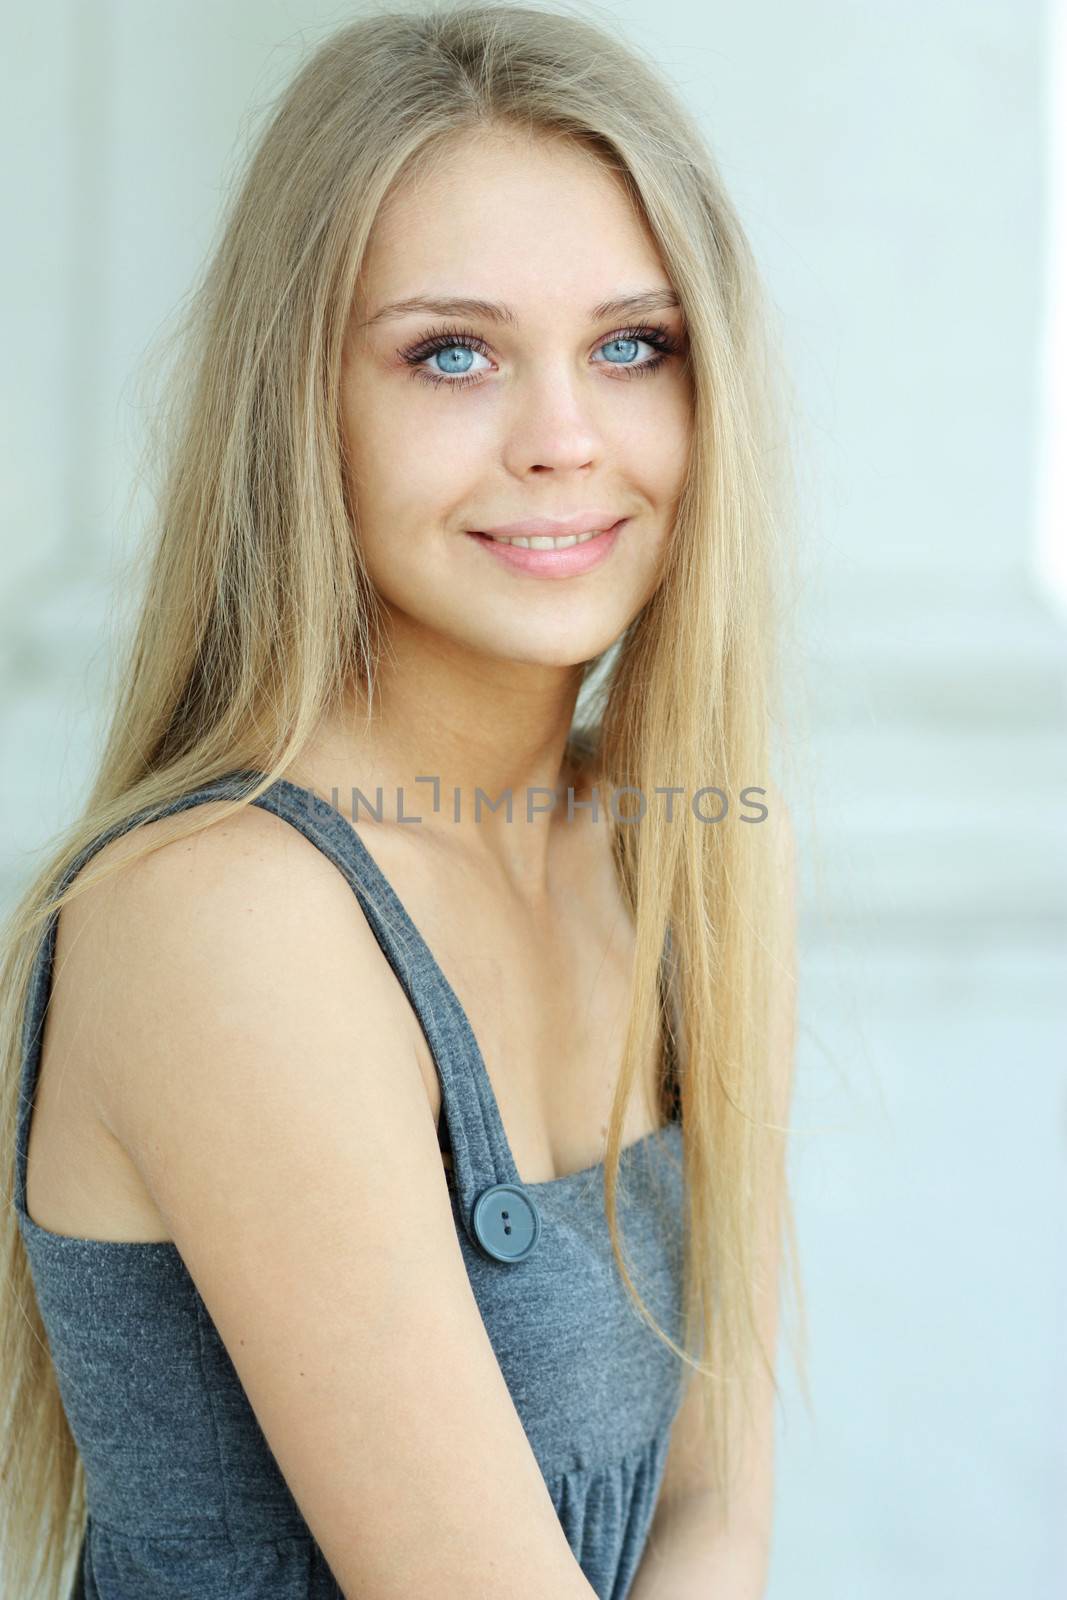 Beautiful young blonde woman. Outdoor portrait